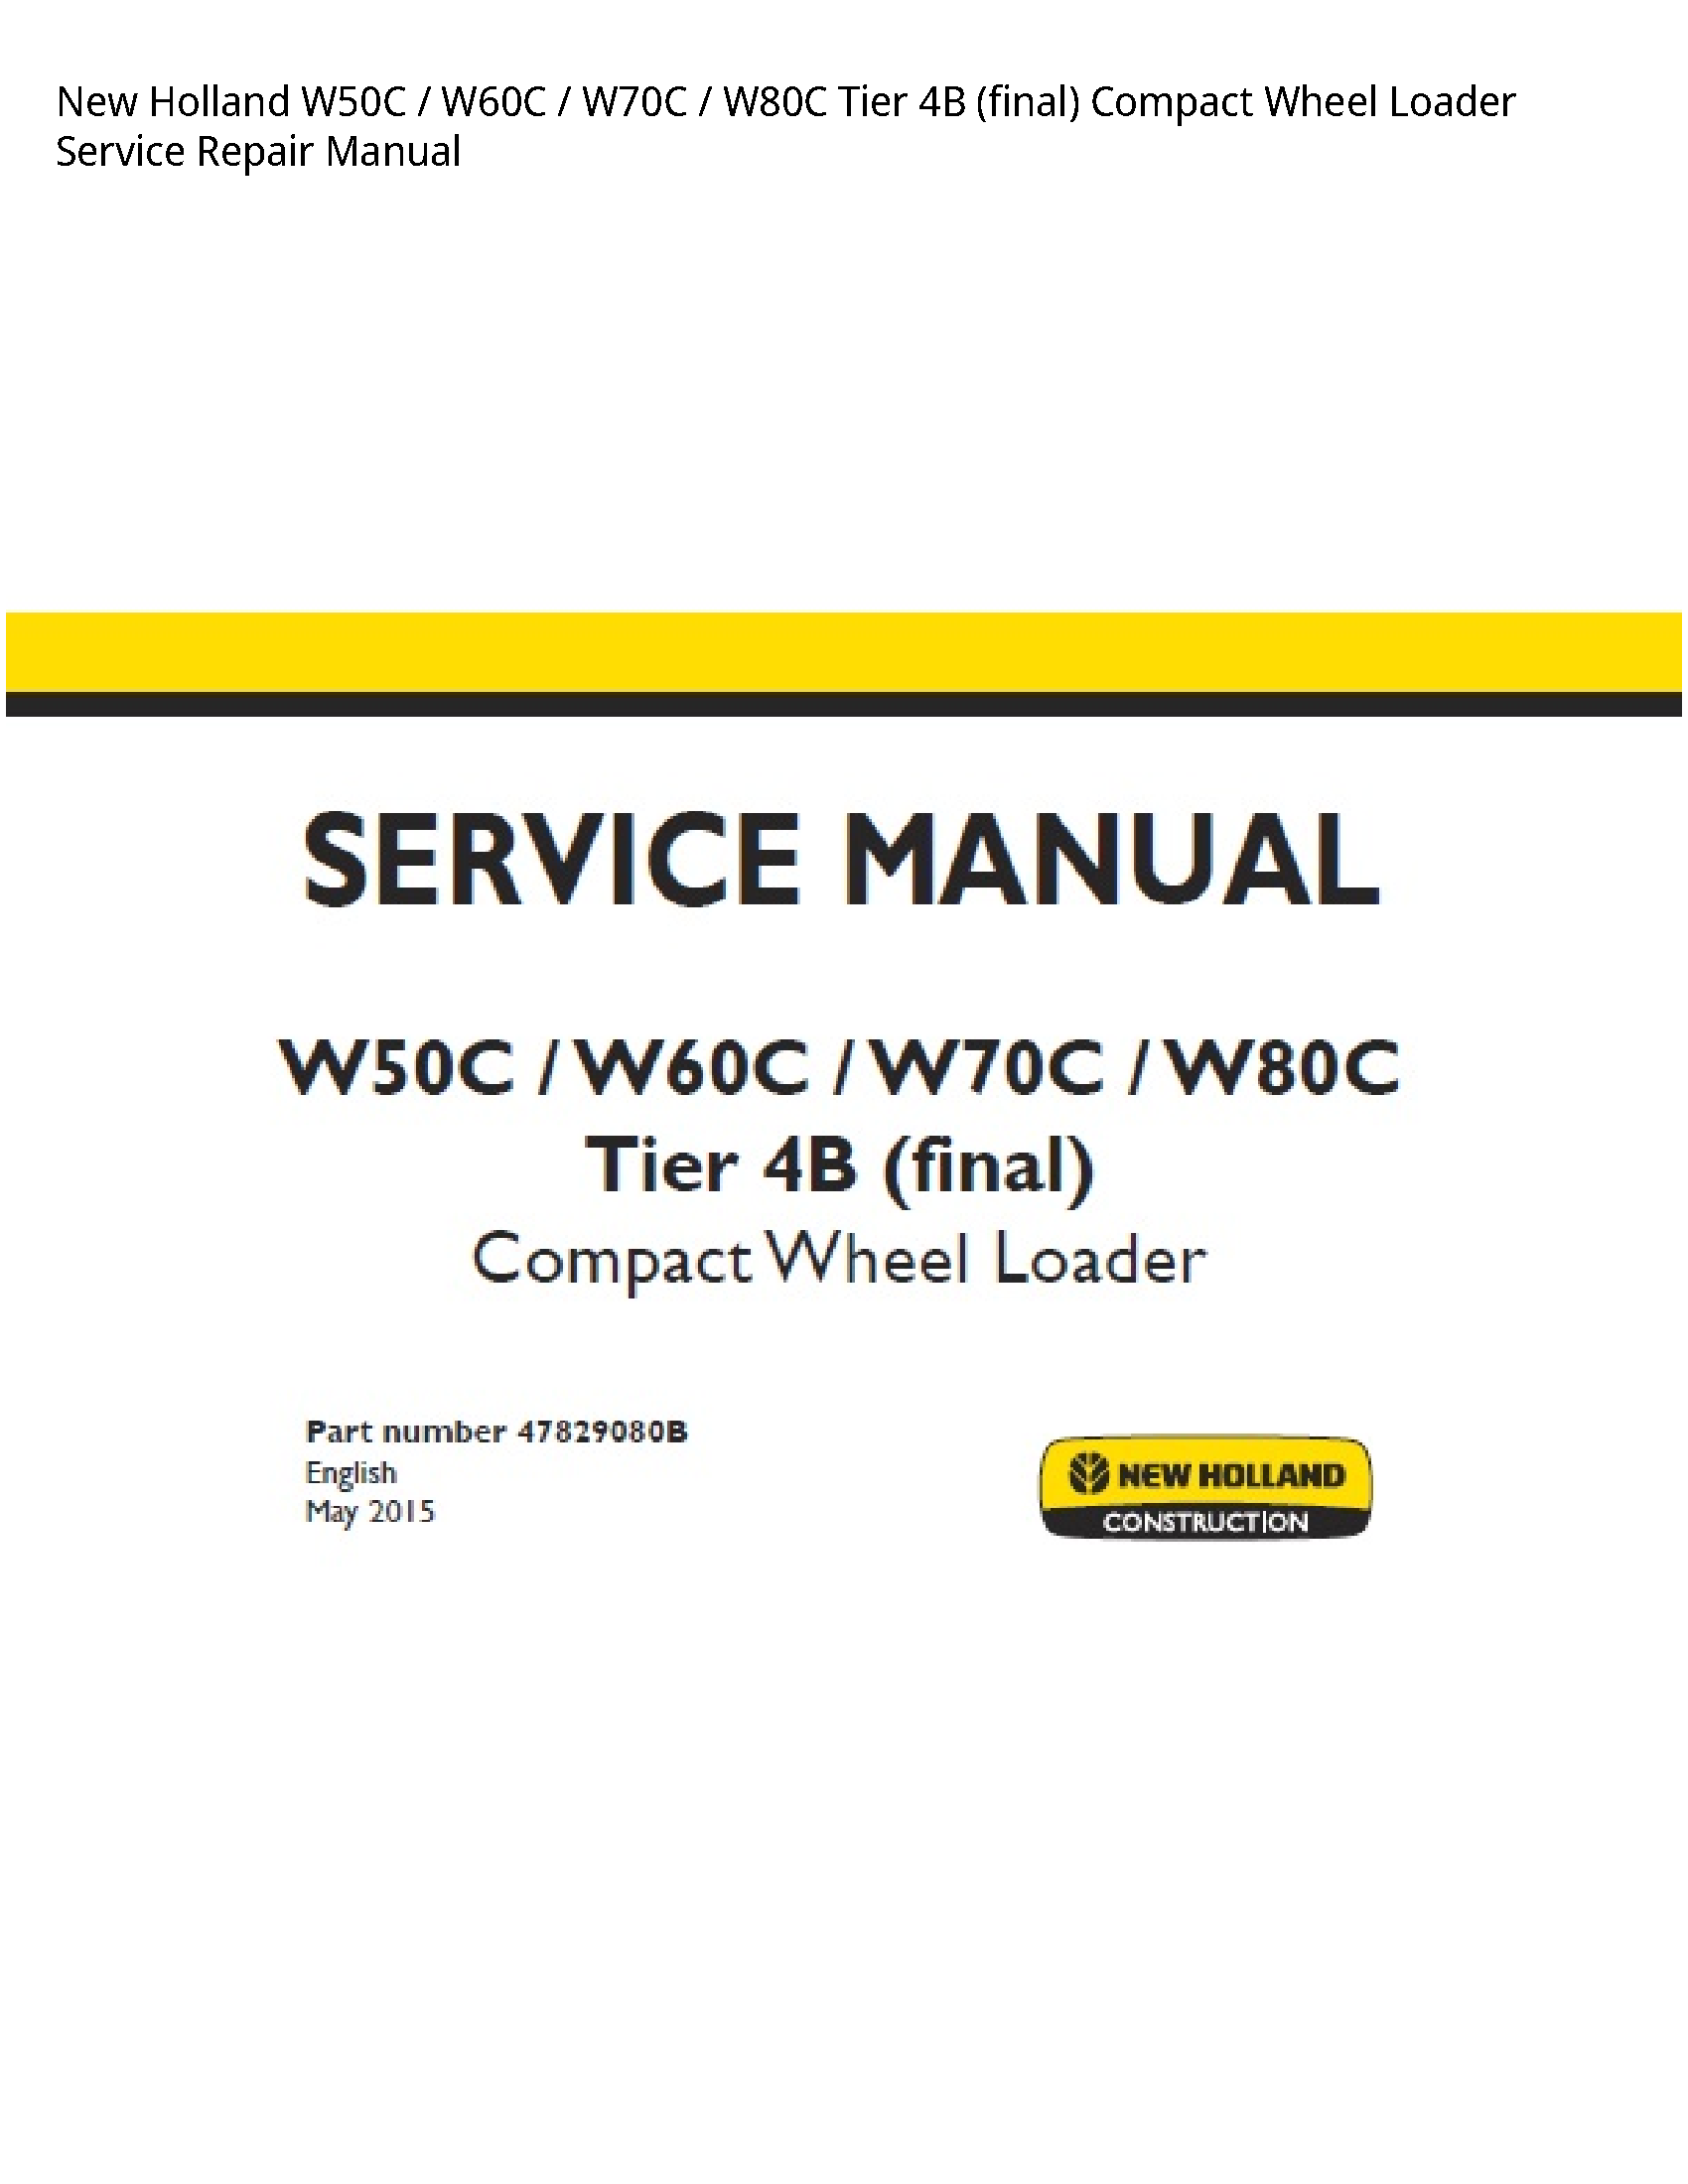 New Holland W50C Tier (final) Compact Wheel Loader manual